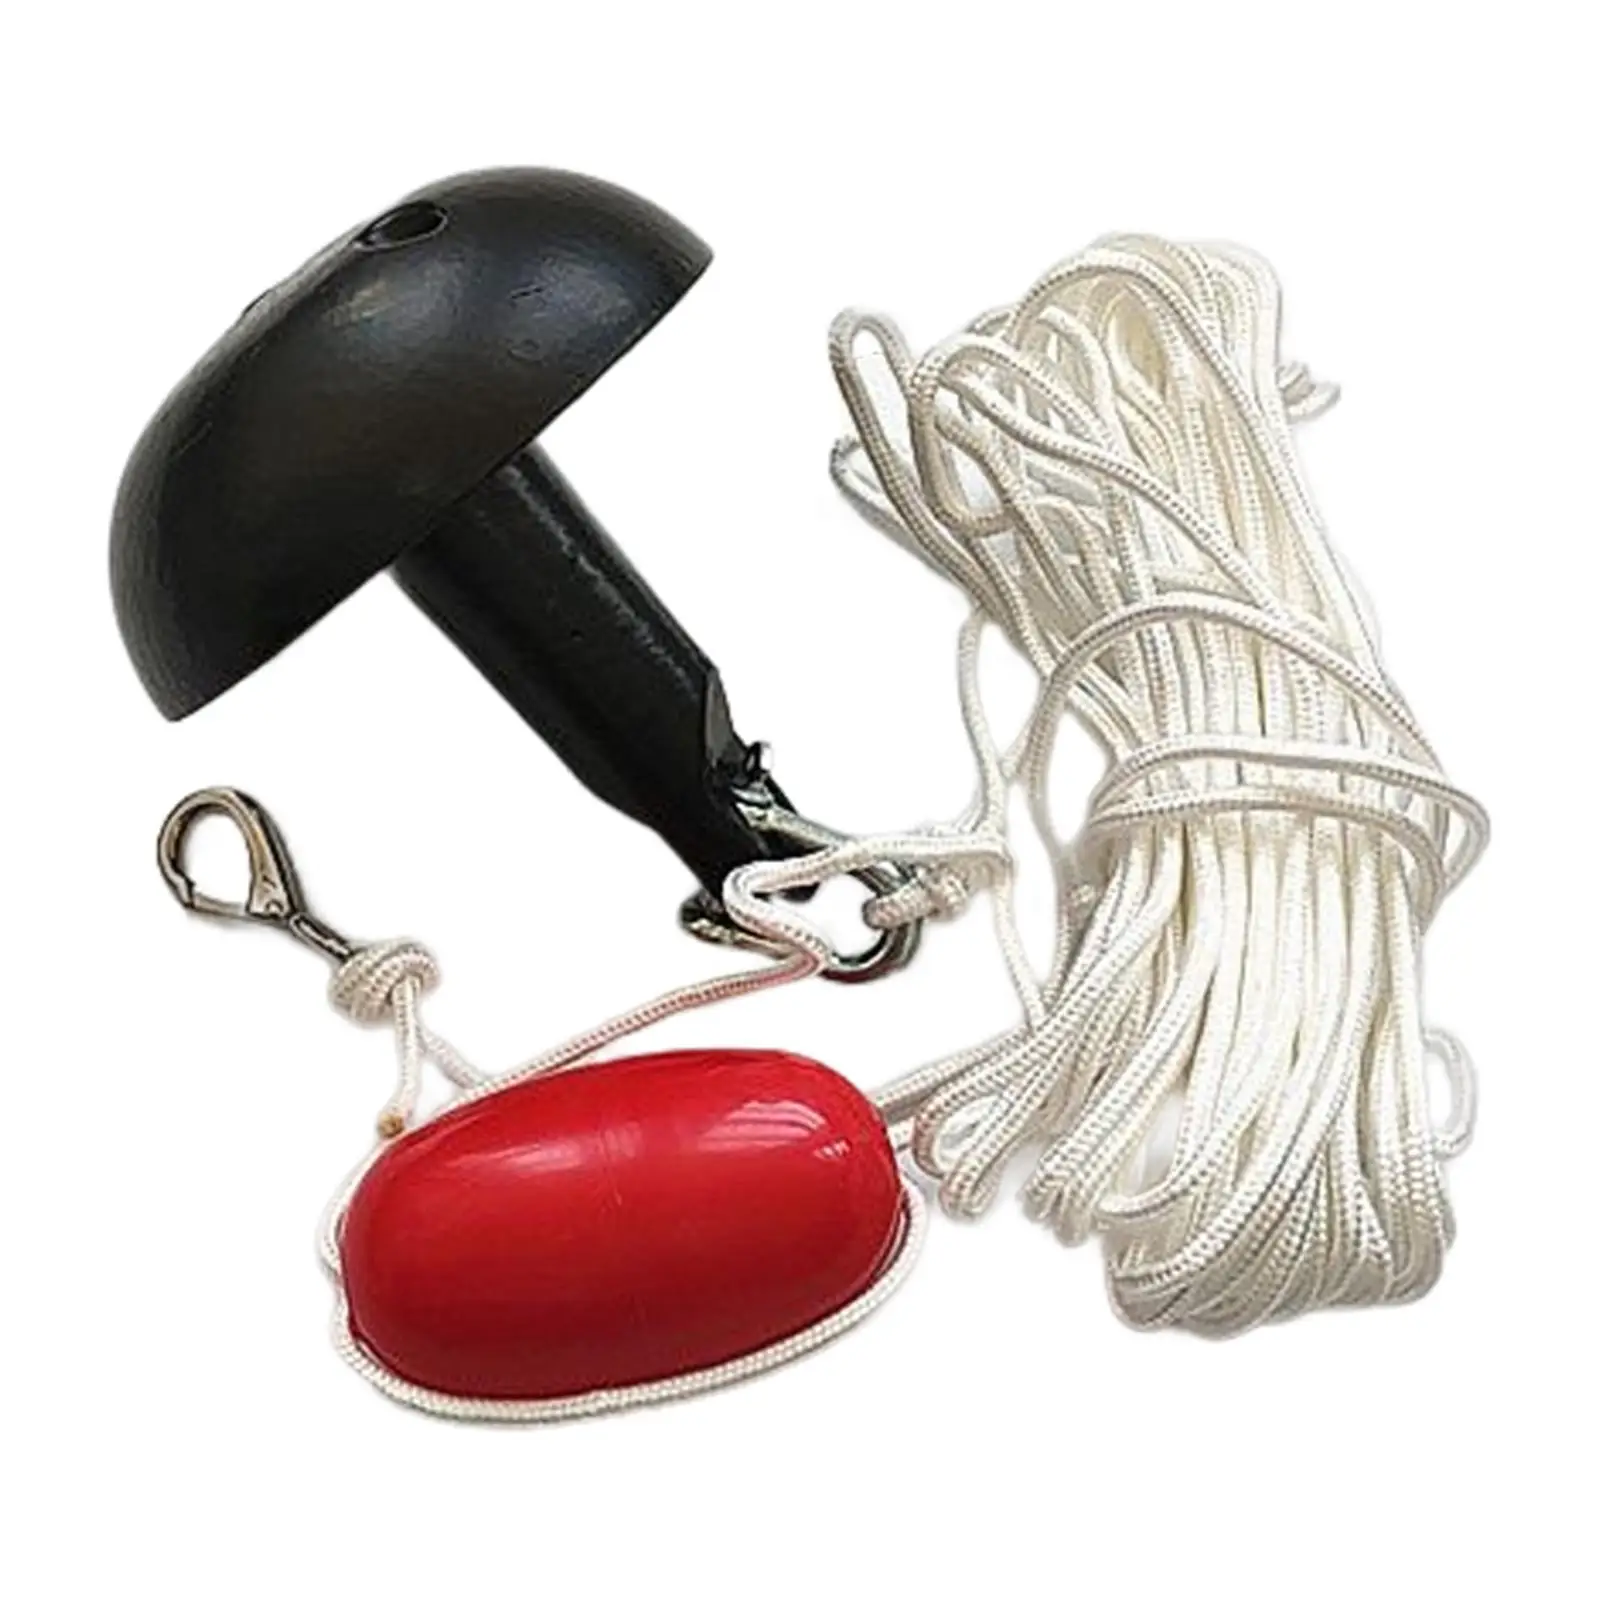 Complete Mushroom Anchor Kit 5 lb with Marker Buoy Black Fit for Canoe Boat